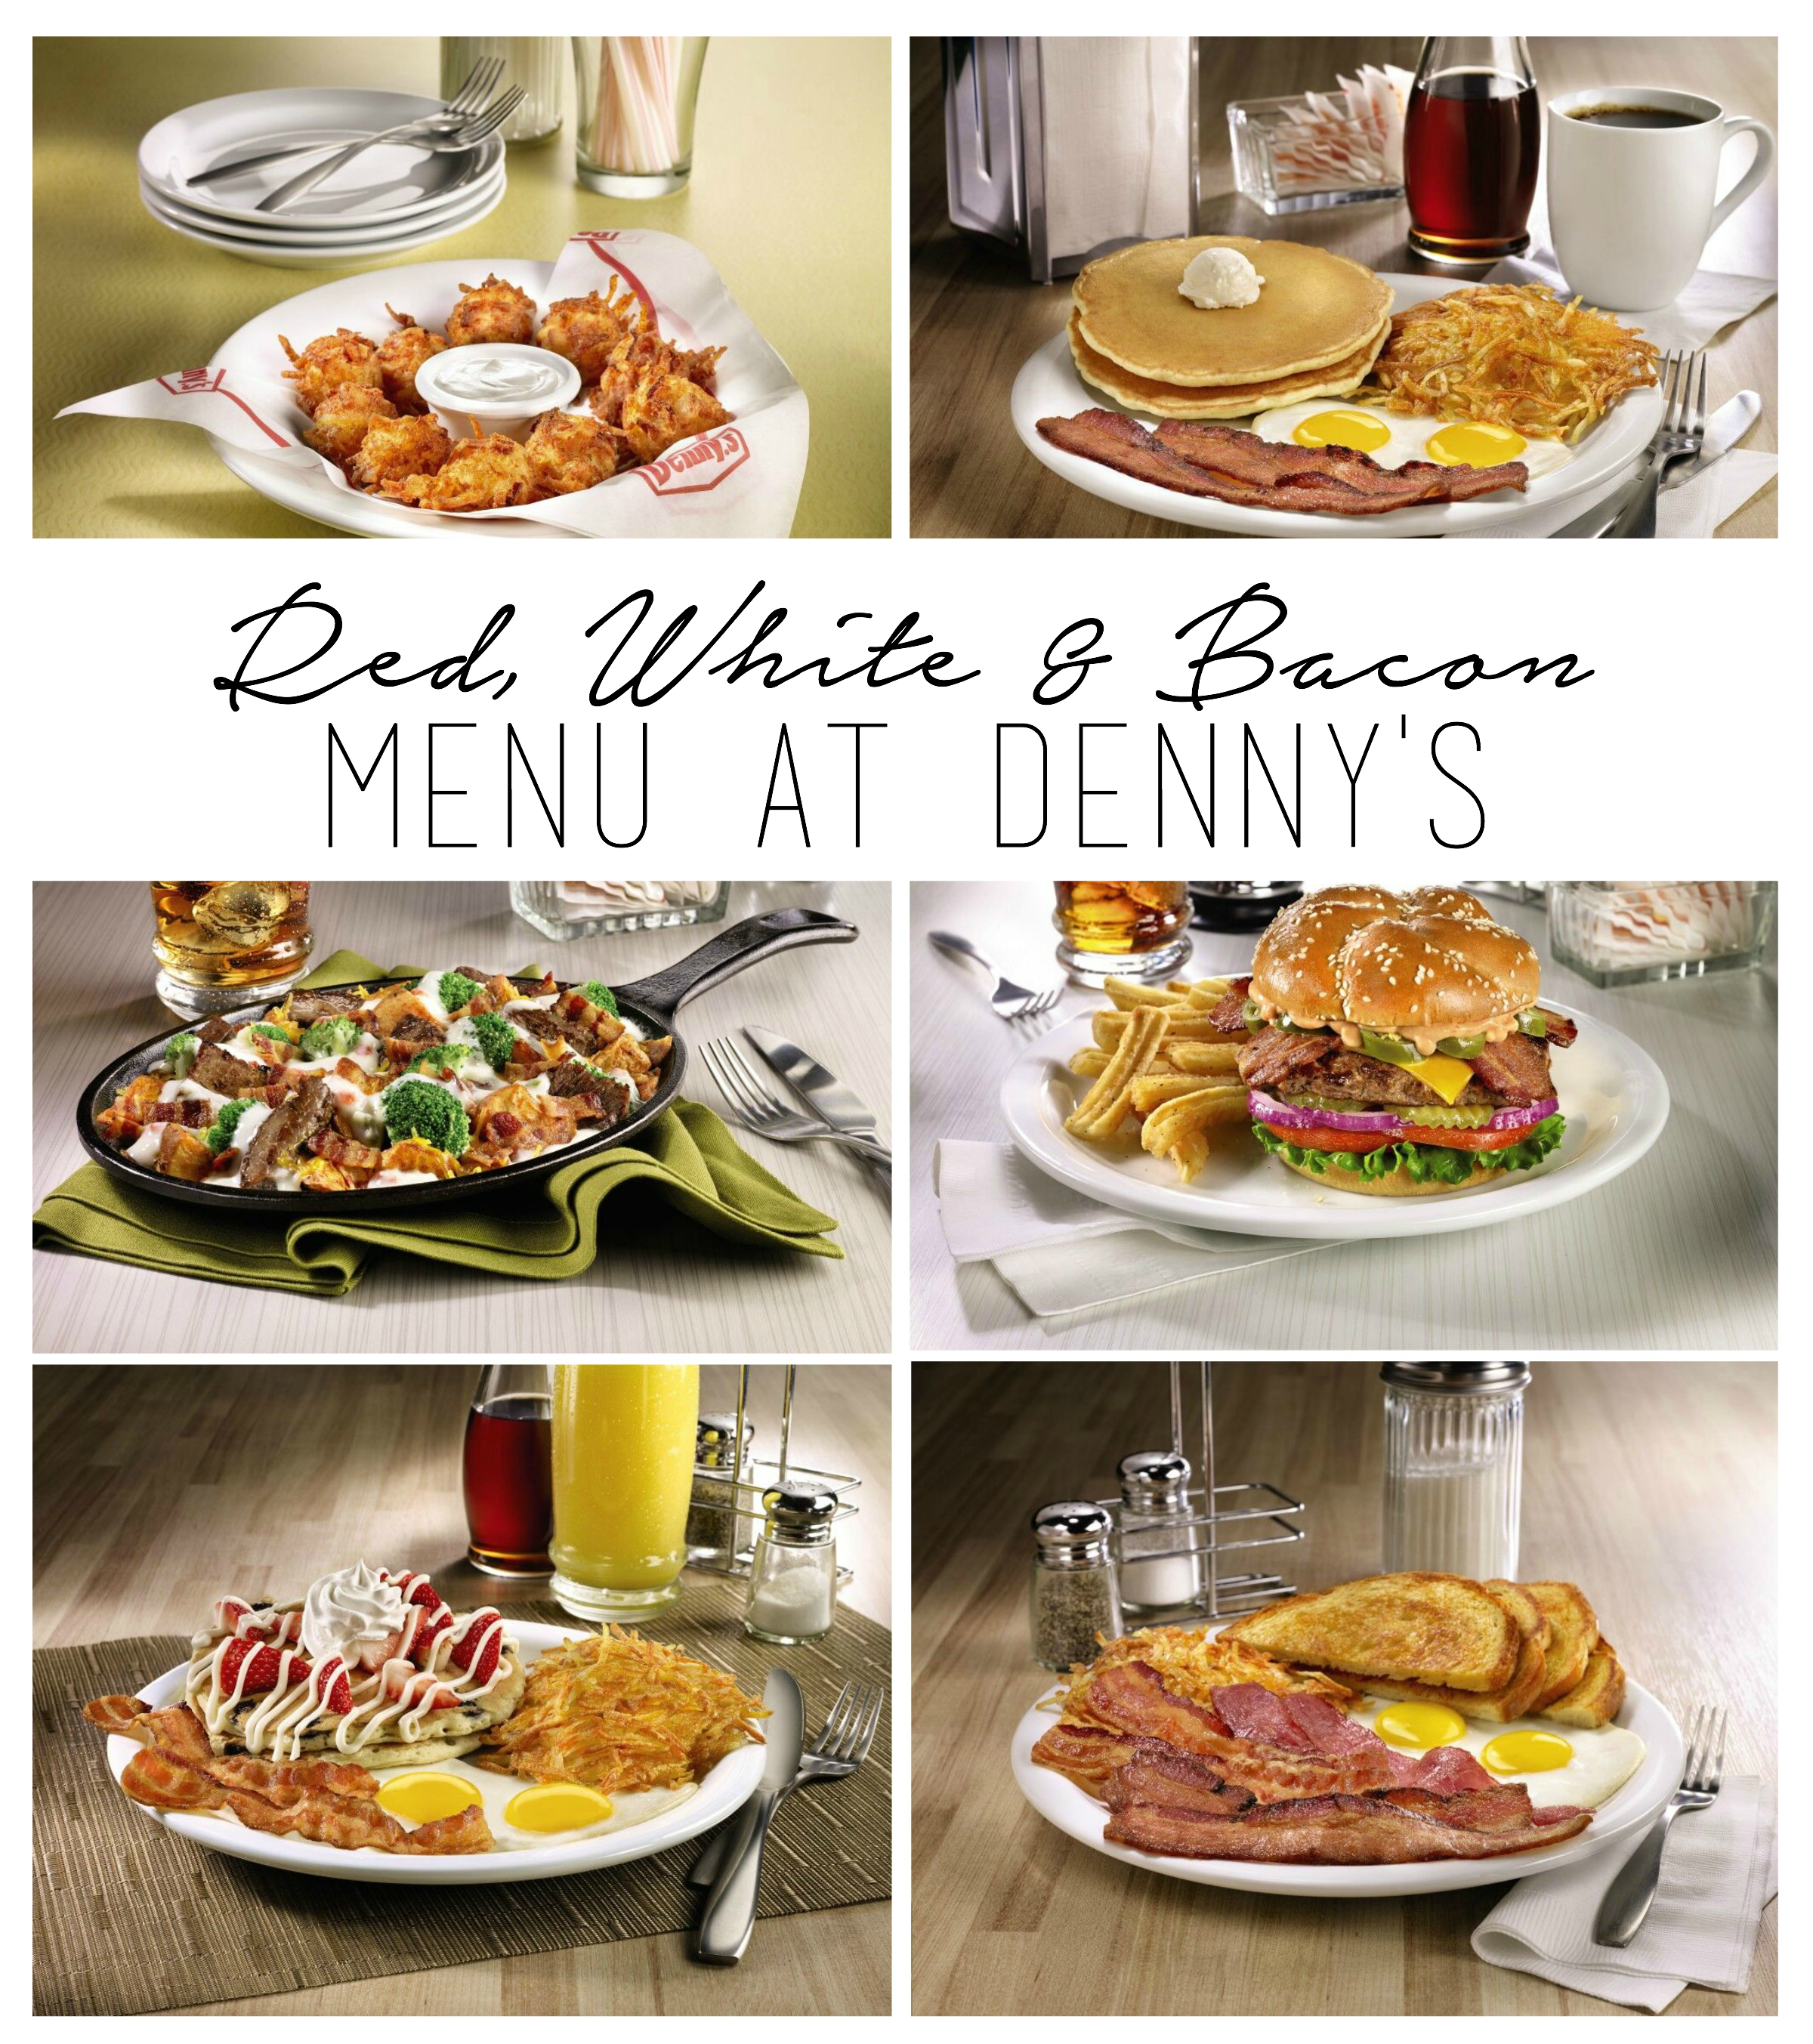 Denny's New Limited-Time Menu Red, White and Bacon Has Arrived  #DennysDiners